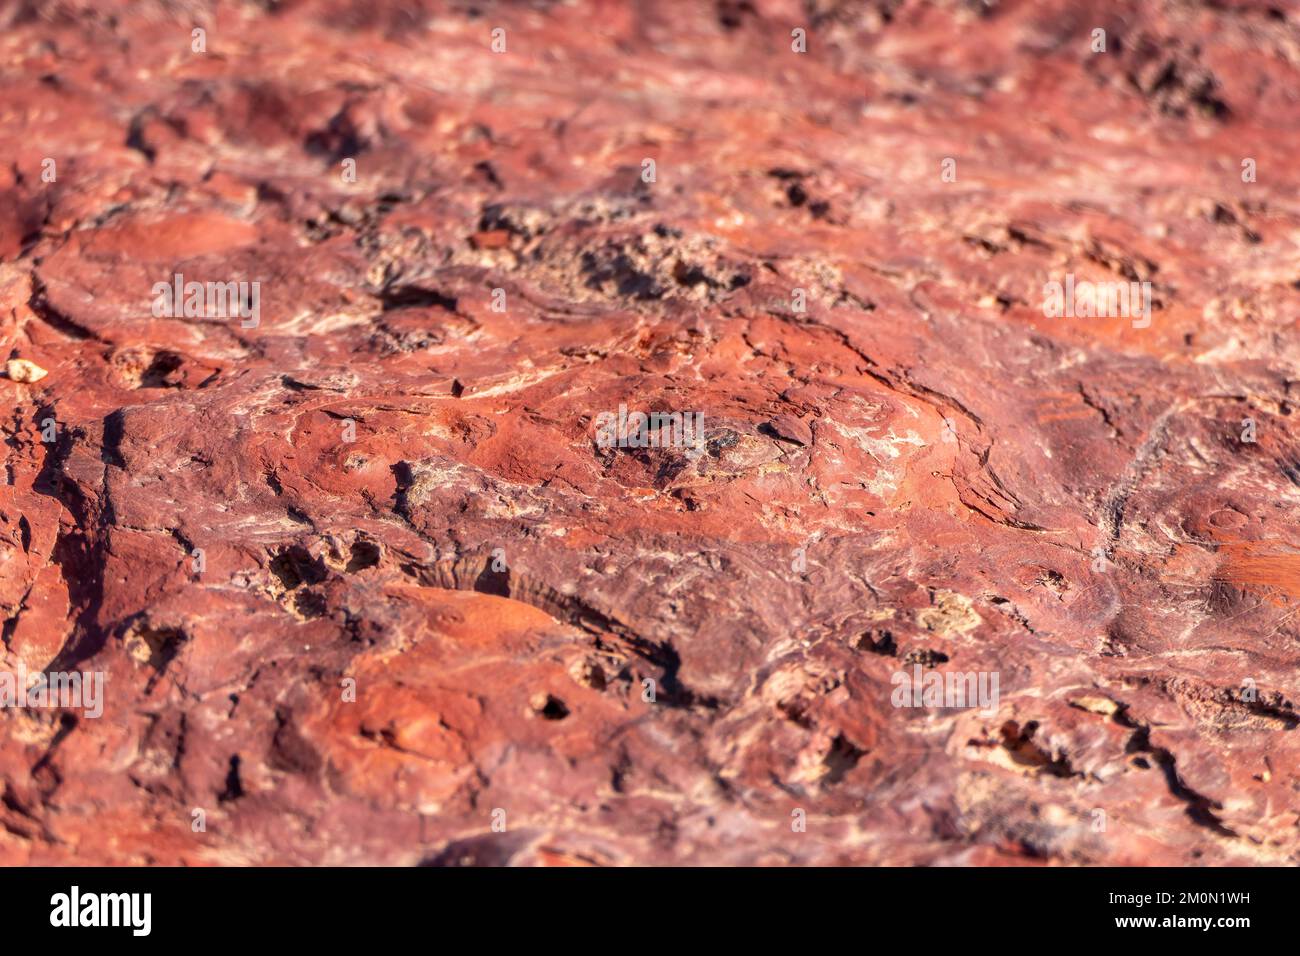 Colorful surface of mineralized stone. Ramon crater. Desert of the Negev. Israel. Selective focus Stock Photo